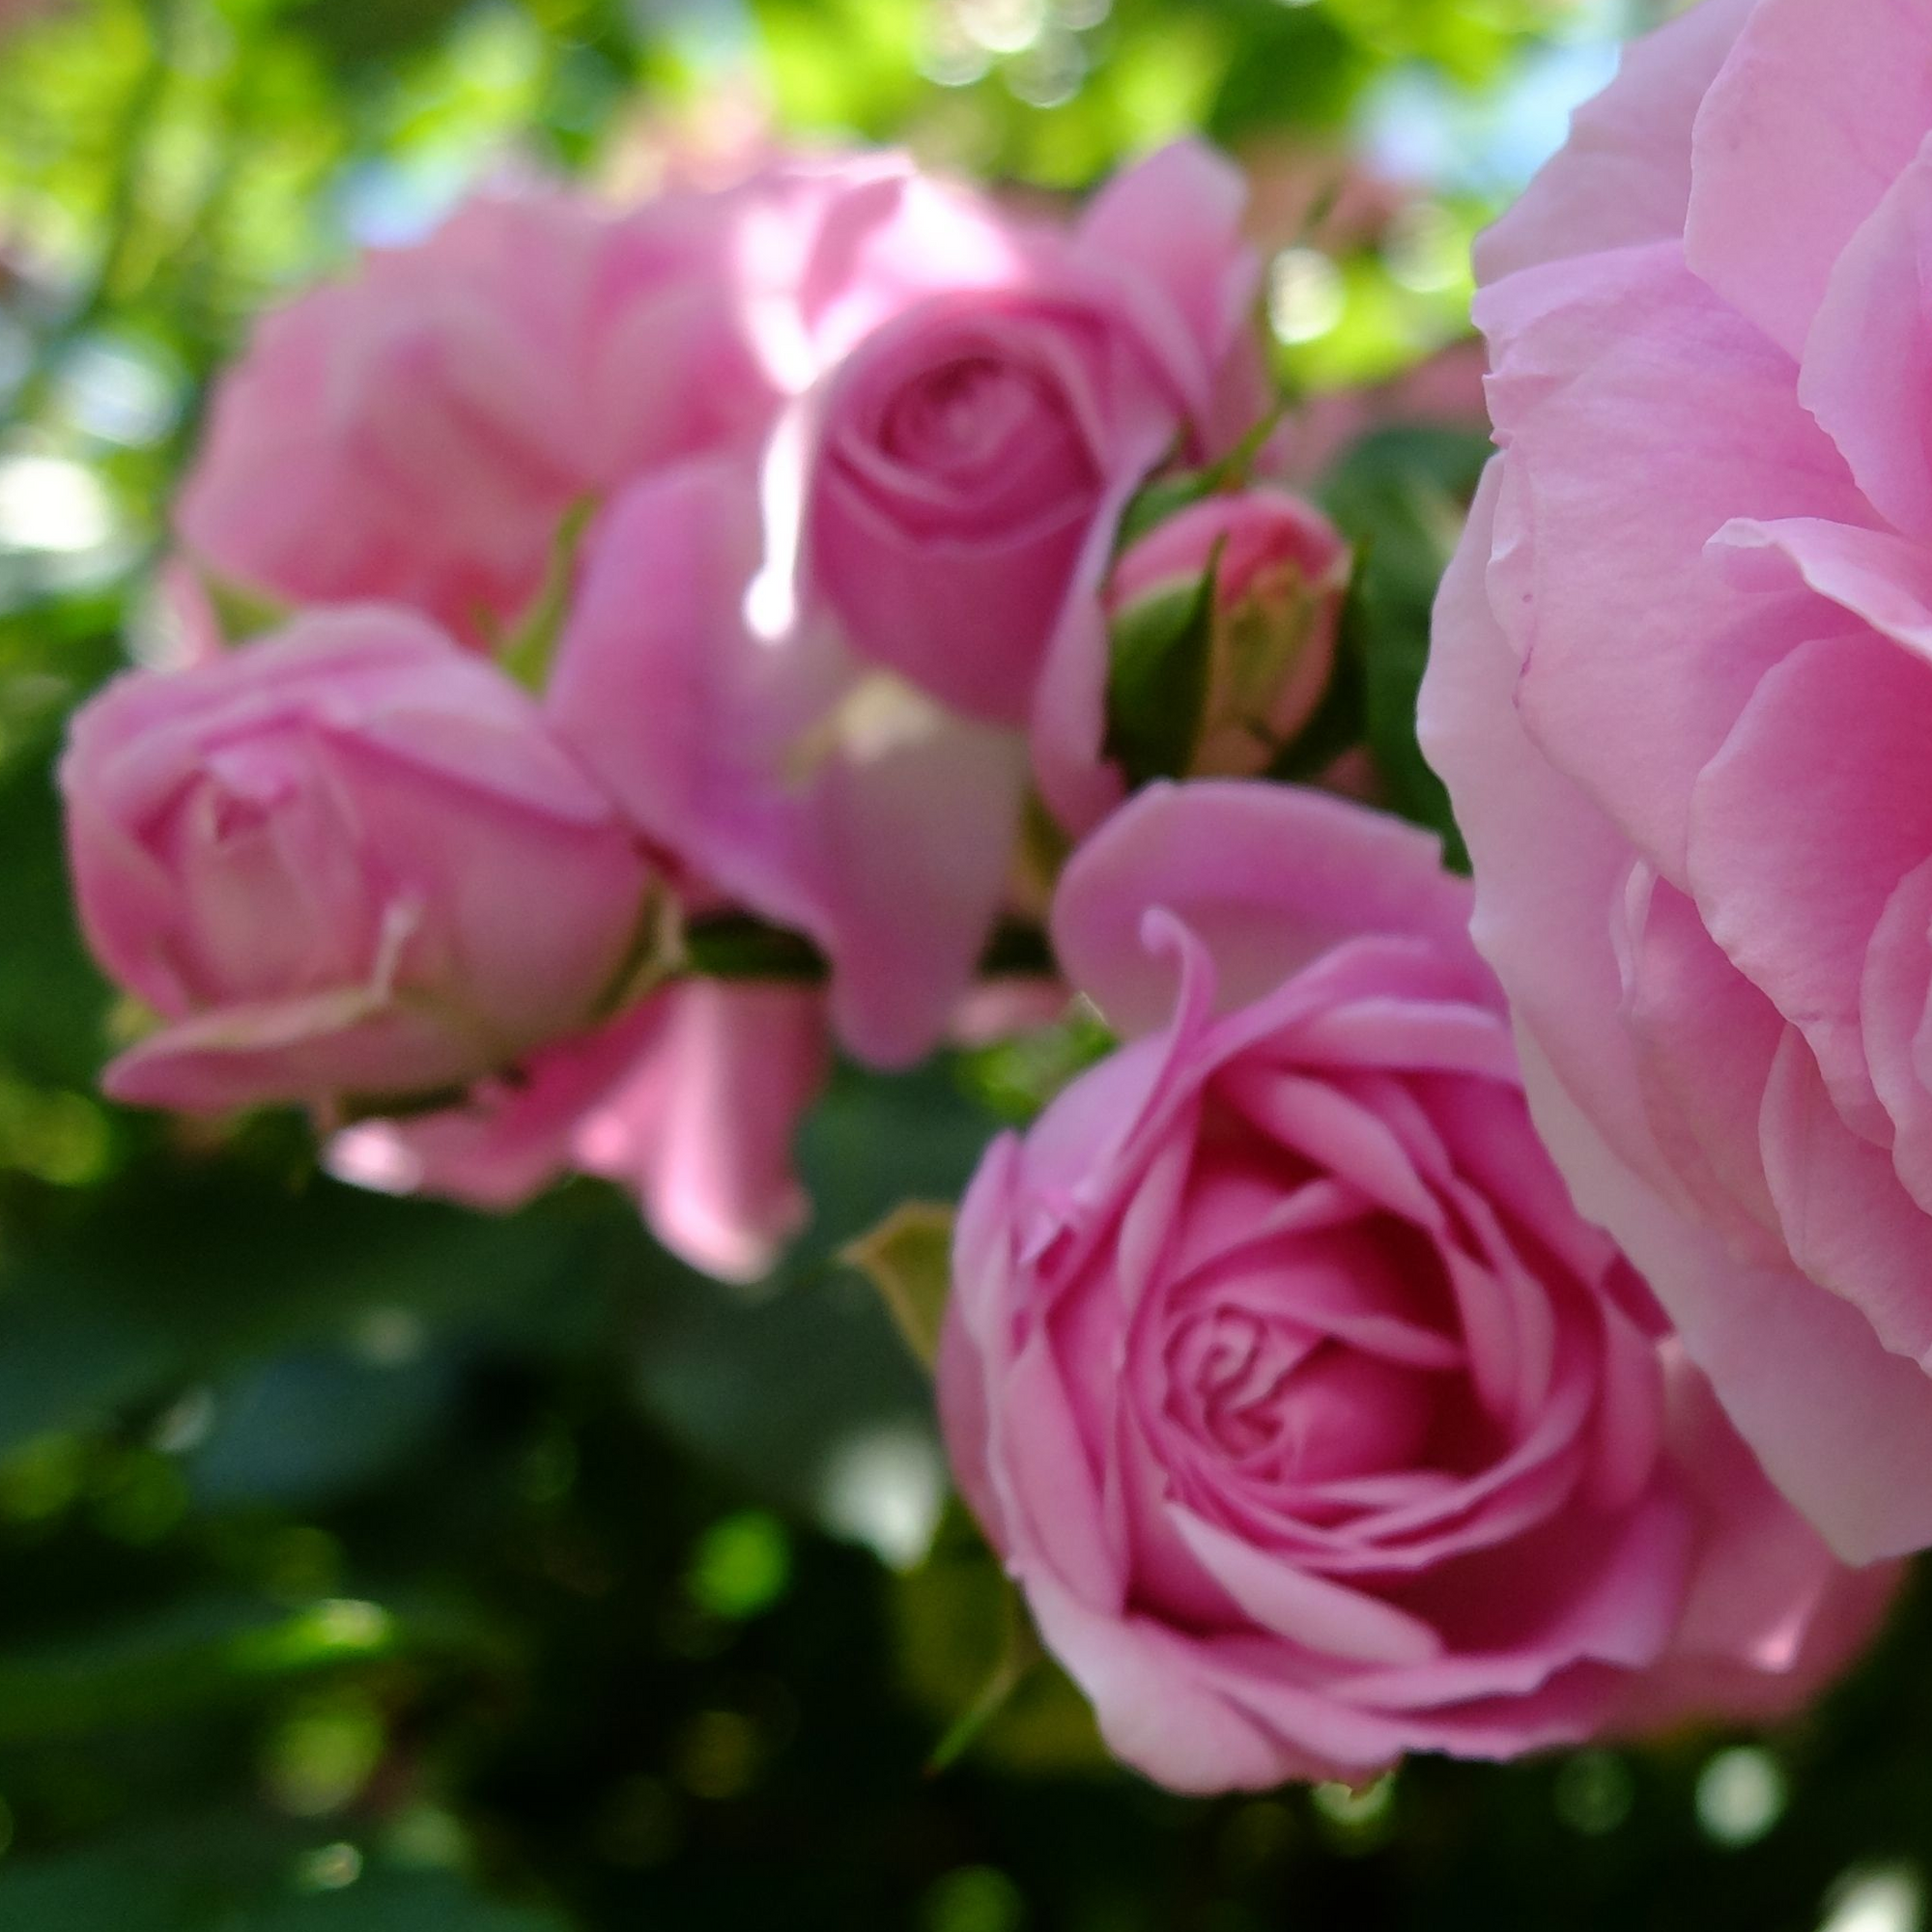 Special Anniversary Rose | Hybrid Tea Rose | 4L Potted Rose